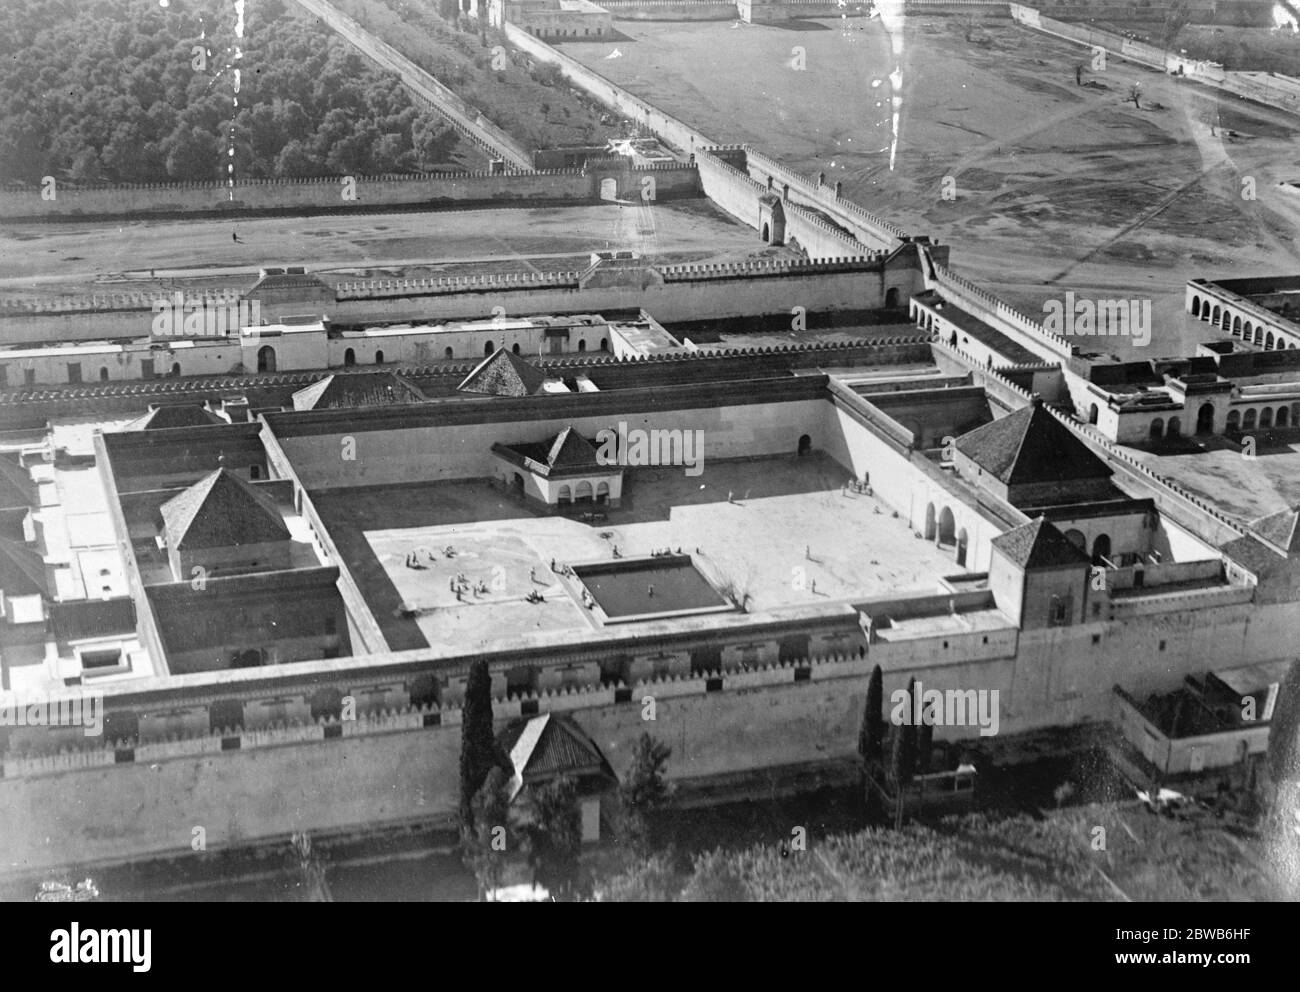 The Sultan ' s Zenana or harem ( part of the palace reserved for the women ) taken from an aeroplane 28 February 1924 Stock Photo